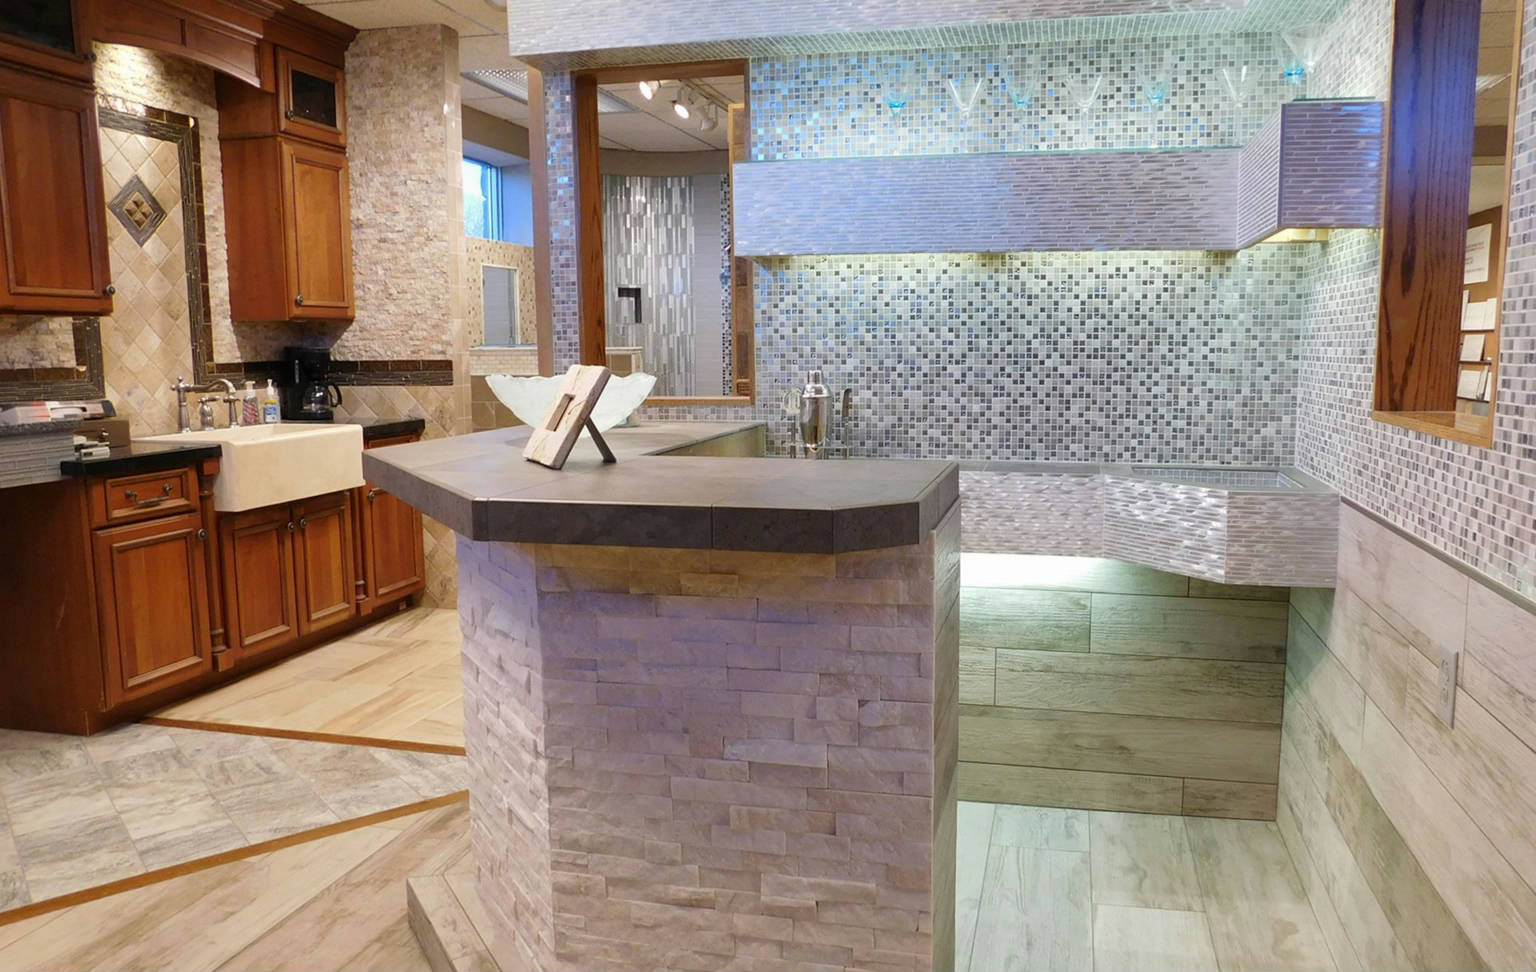 SHOWROOM INSTALLATIONS | Qualis Ceramica | Luxury Tile and Vinyl at affordable prices